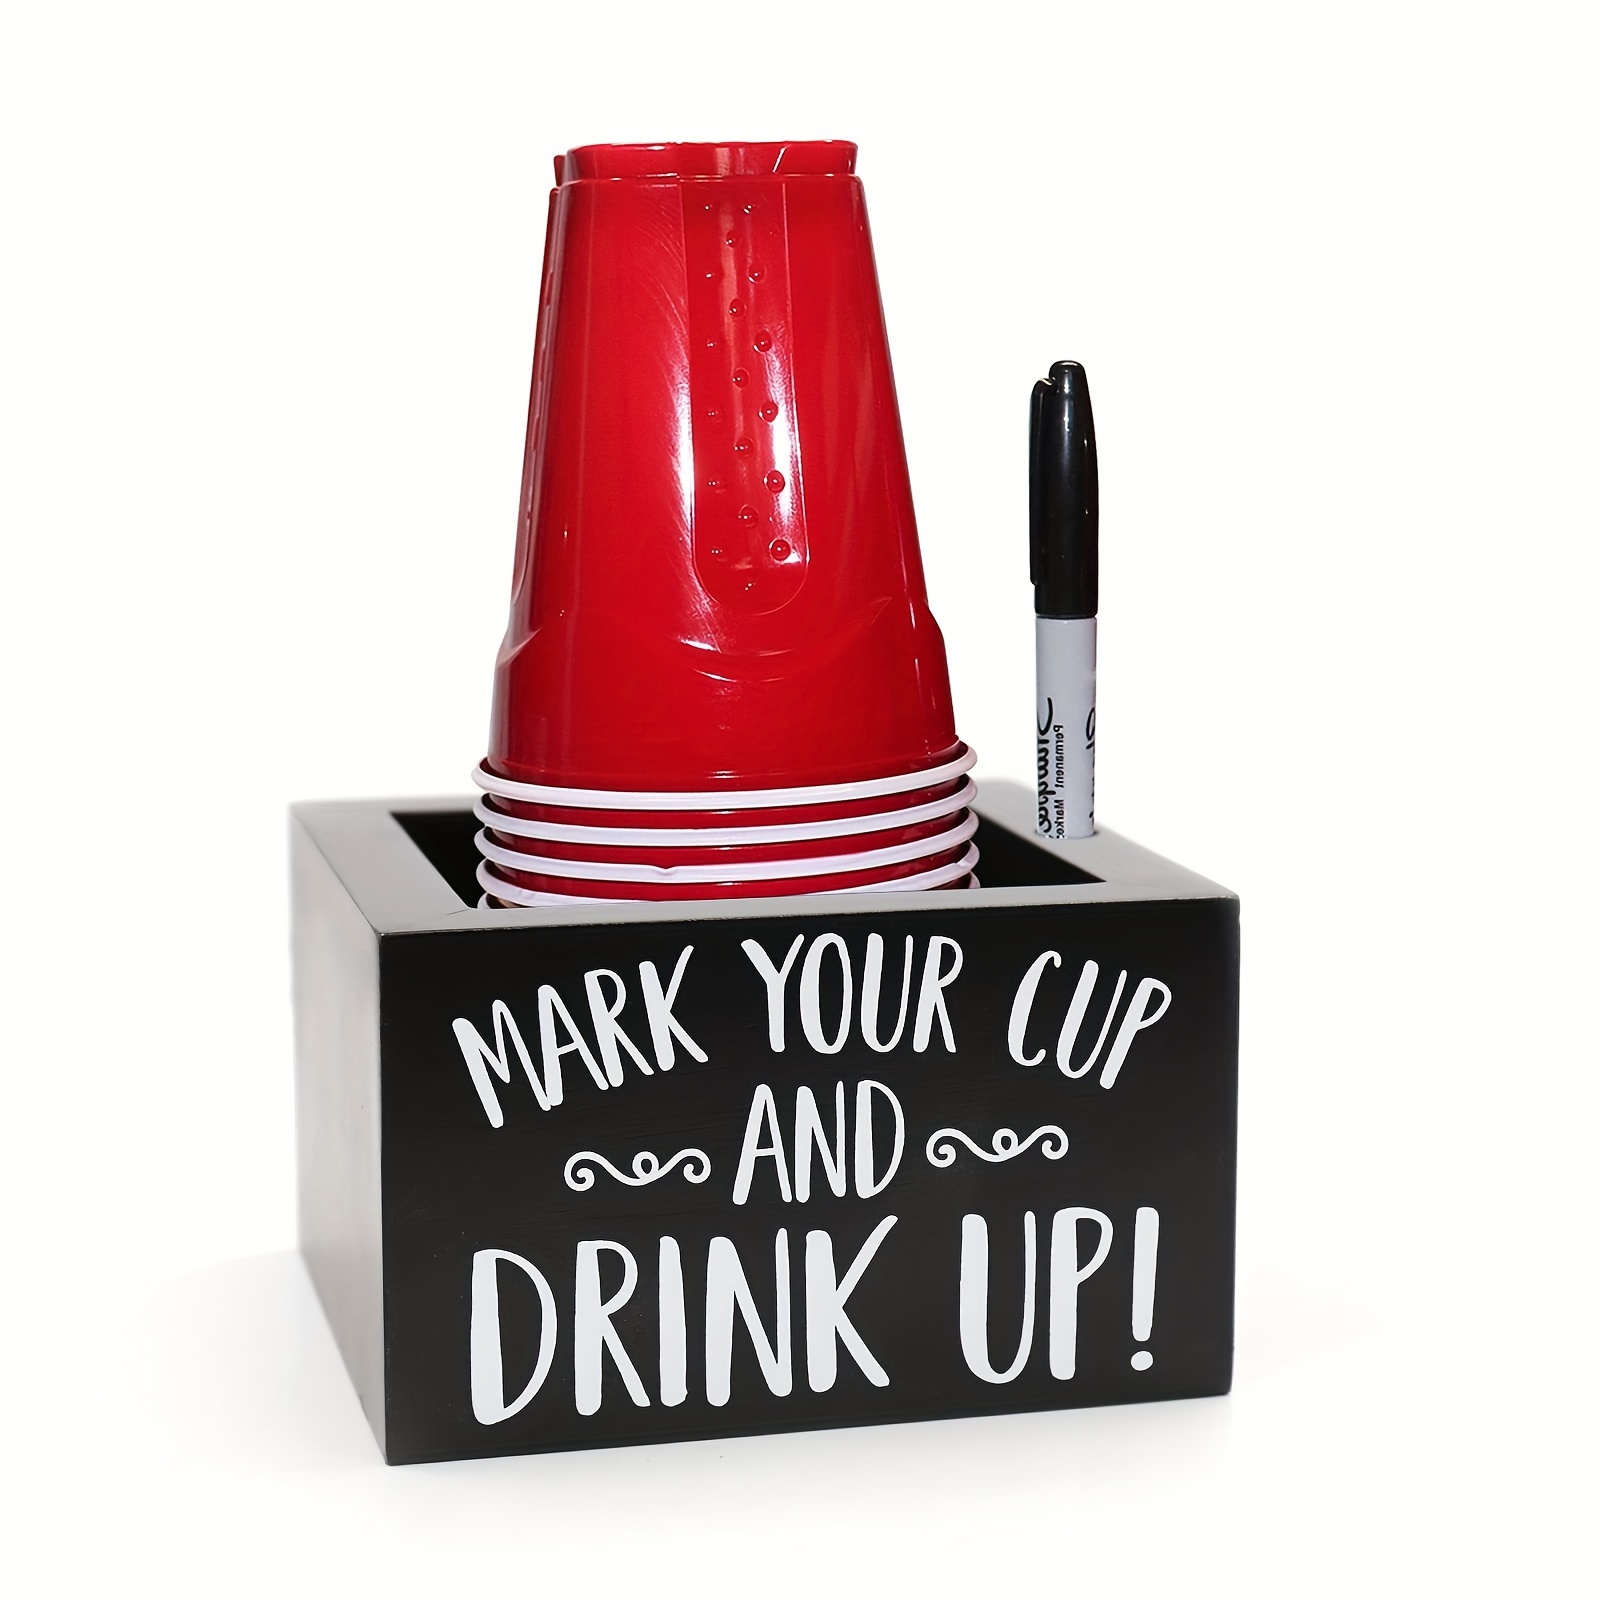 

1pc Solo Cup Party Cup Caddy, Wooden Party Cup Dispenser, Mark Your Cup Plastic Cup Marker Holder, Farmhouse Modern Home Decor, Holiday Housewarming Hostess Bridal Shower Gift (marker Not Included)